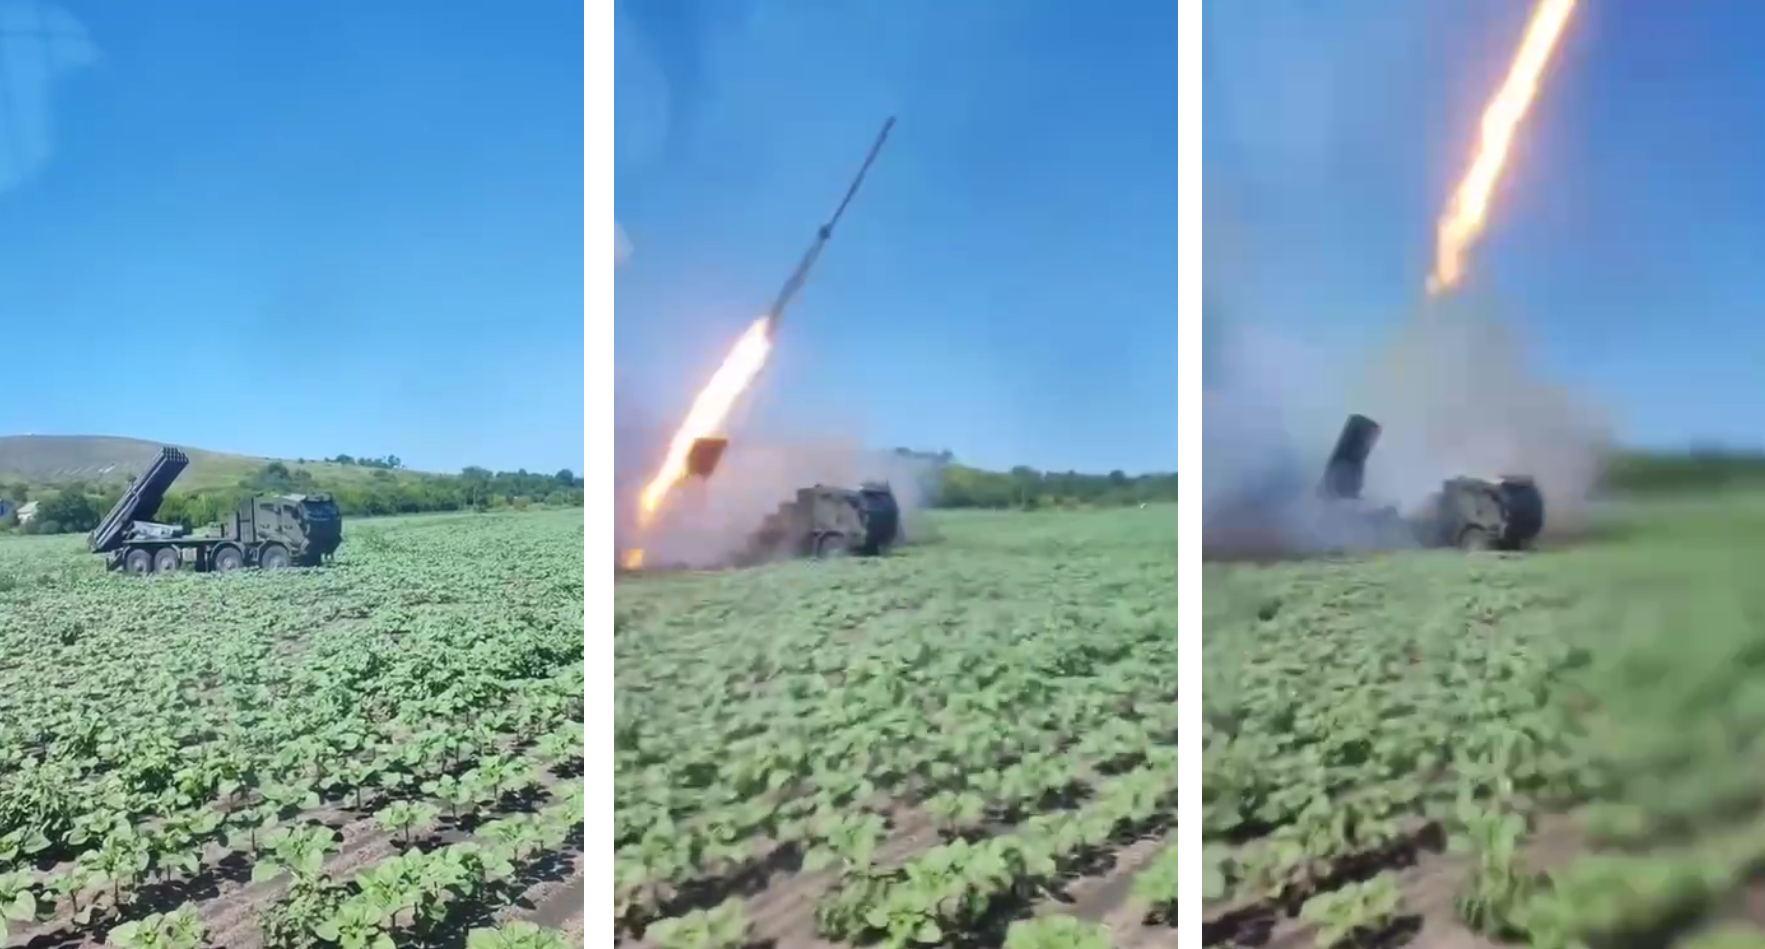 The Ukrainian military showed how the Multiple Rocket Launcher System "Bureviy" fired 16 missiles in 6 seconds at the positions of the Russians